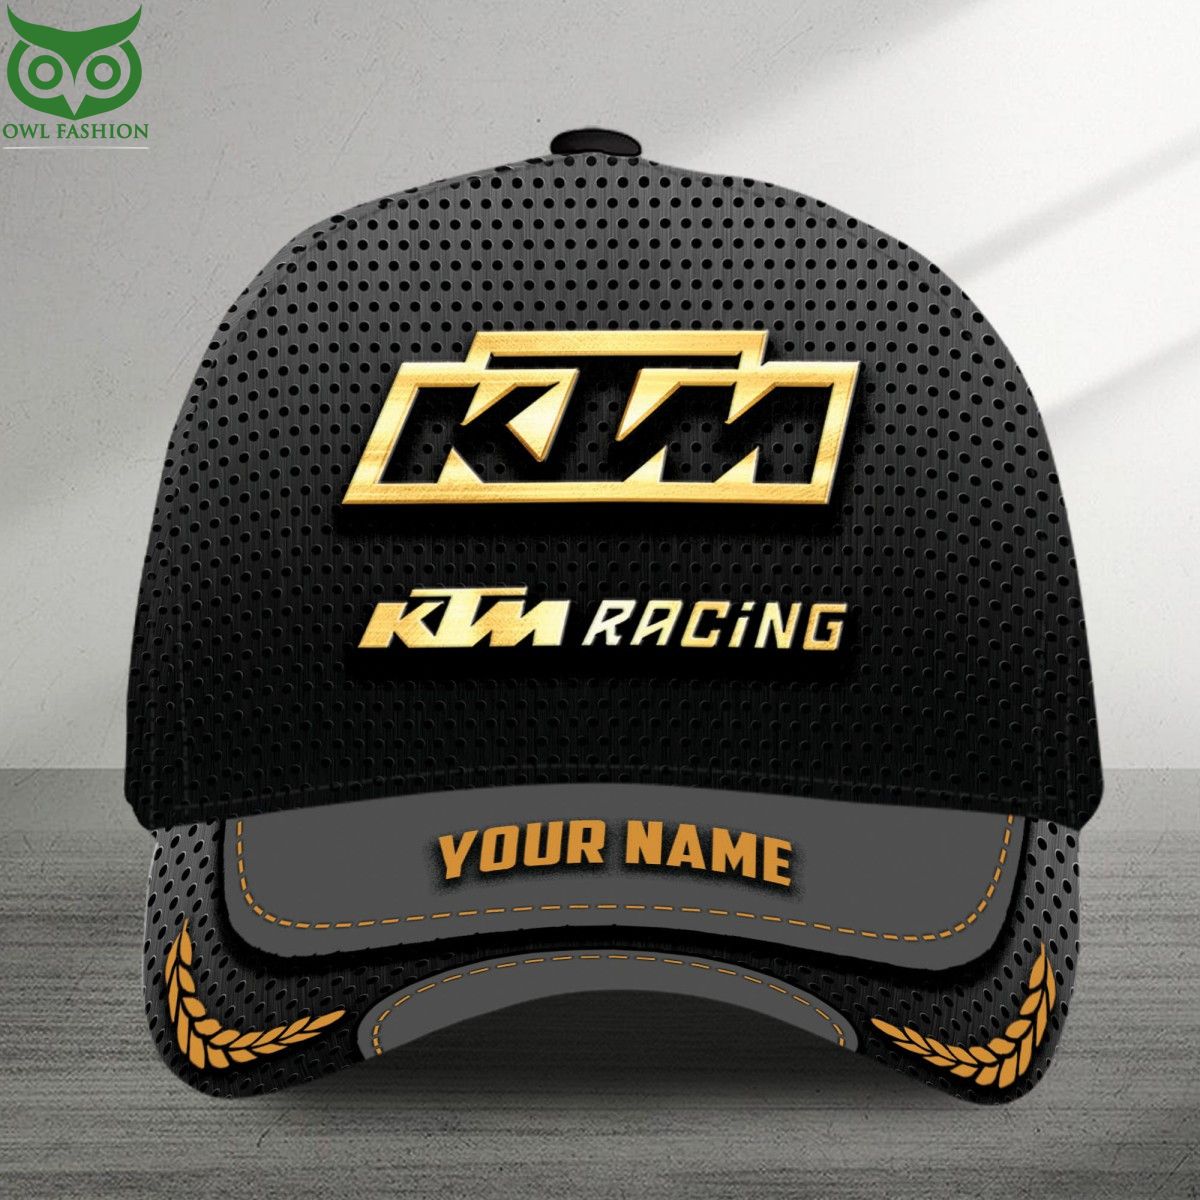 KTM Racing Motor Design New Classic Cap Handsome as usual